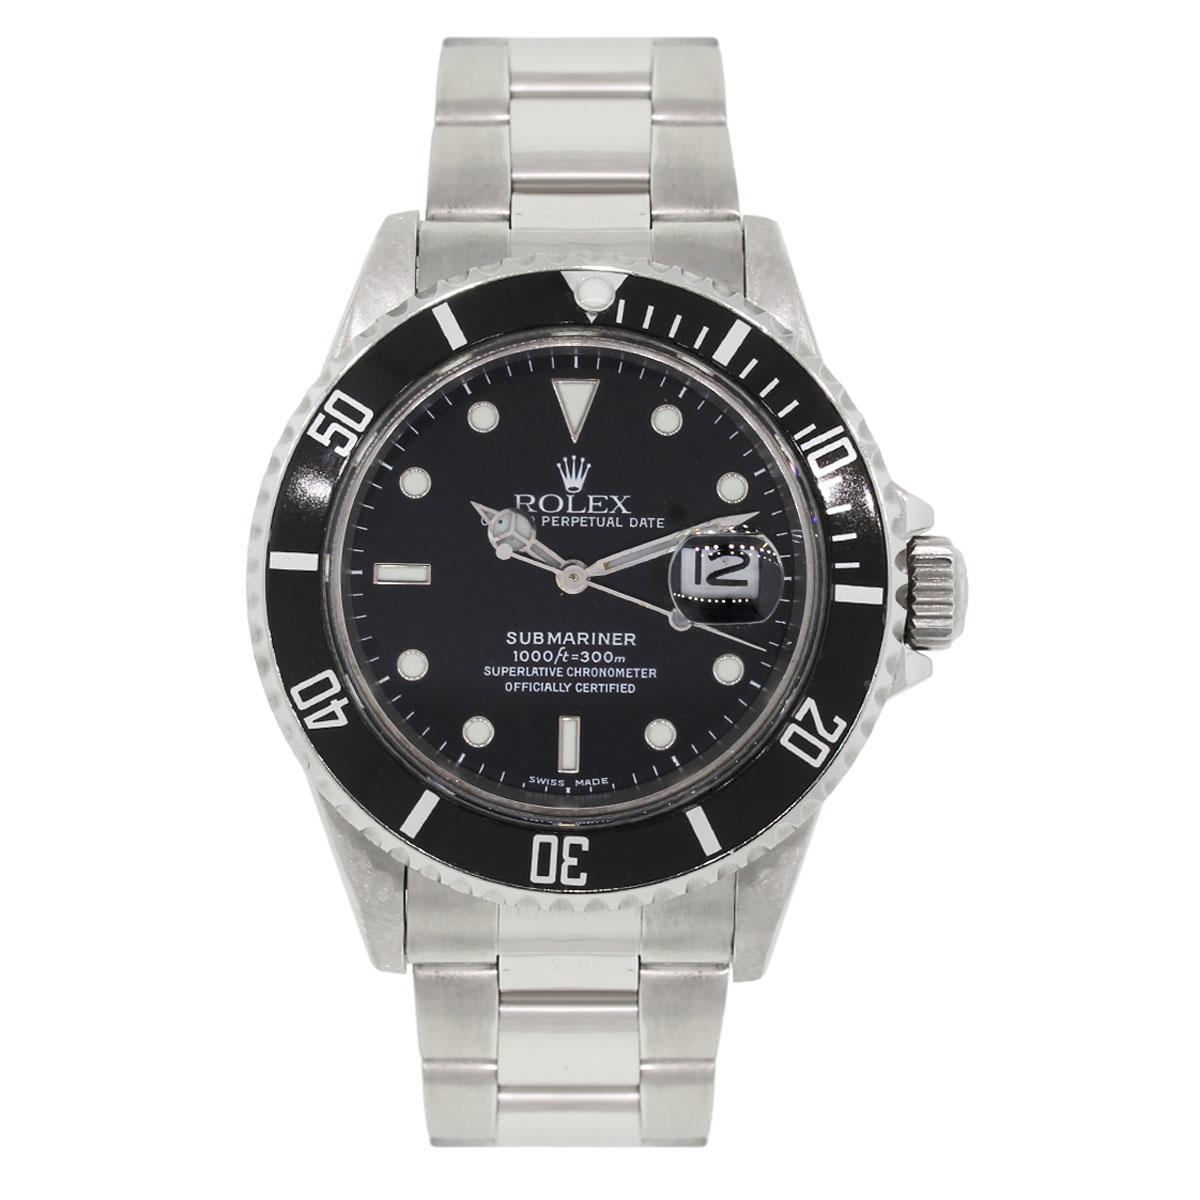 Brand: Rolex
MPN: 16800
Model: Submariner
Case Material: Stainless steel
Case Diameter: 40mm
Crystal: Sapphire crystal
Bezel: Unidirectional black bezel
Dial: Black dial with date window at 3 o’clock position
Bracelet: Stainless steel oyster